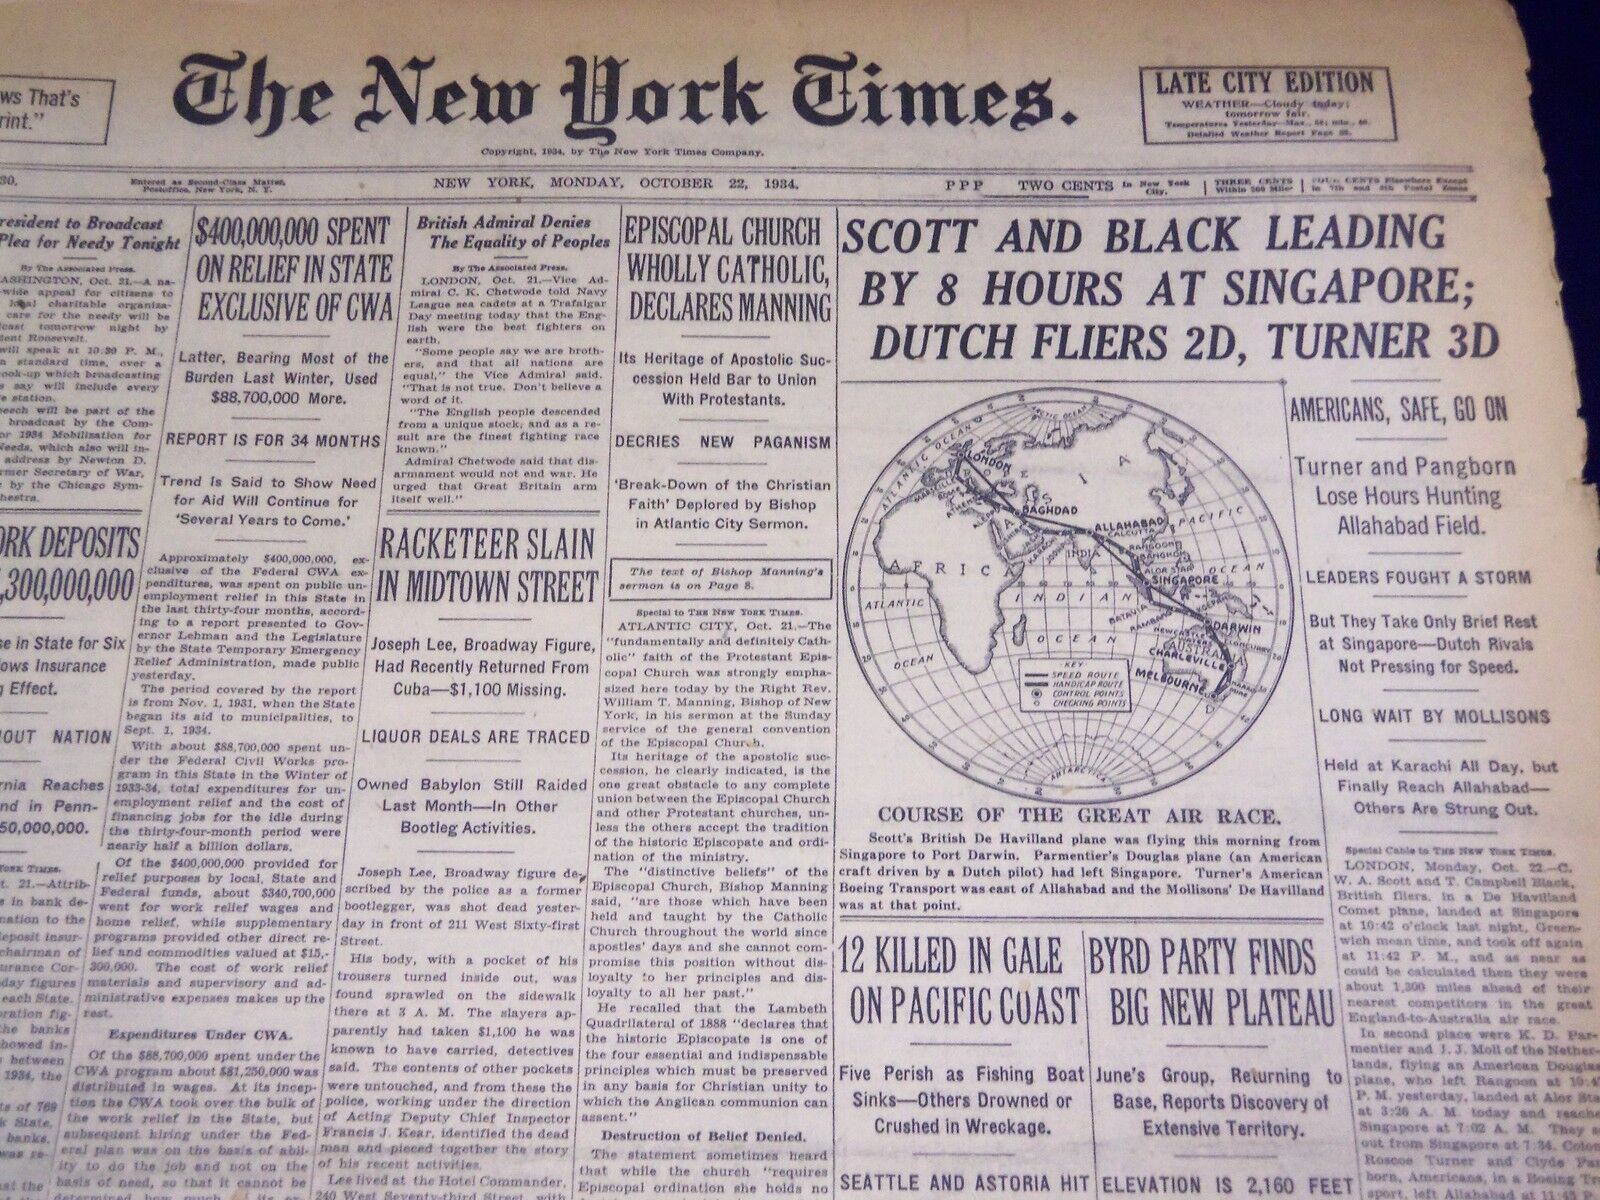 1934 OCT 22 NEW YORK TIMES - SCOTT & BLACK LEADING BY 8 HOURS SINGAPORE- NT 1623